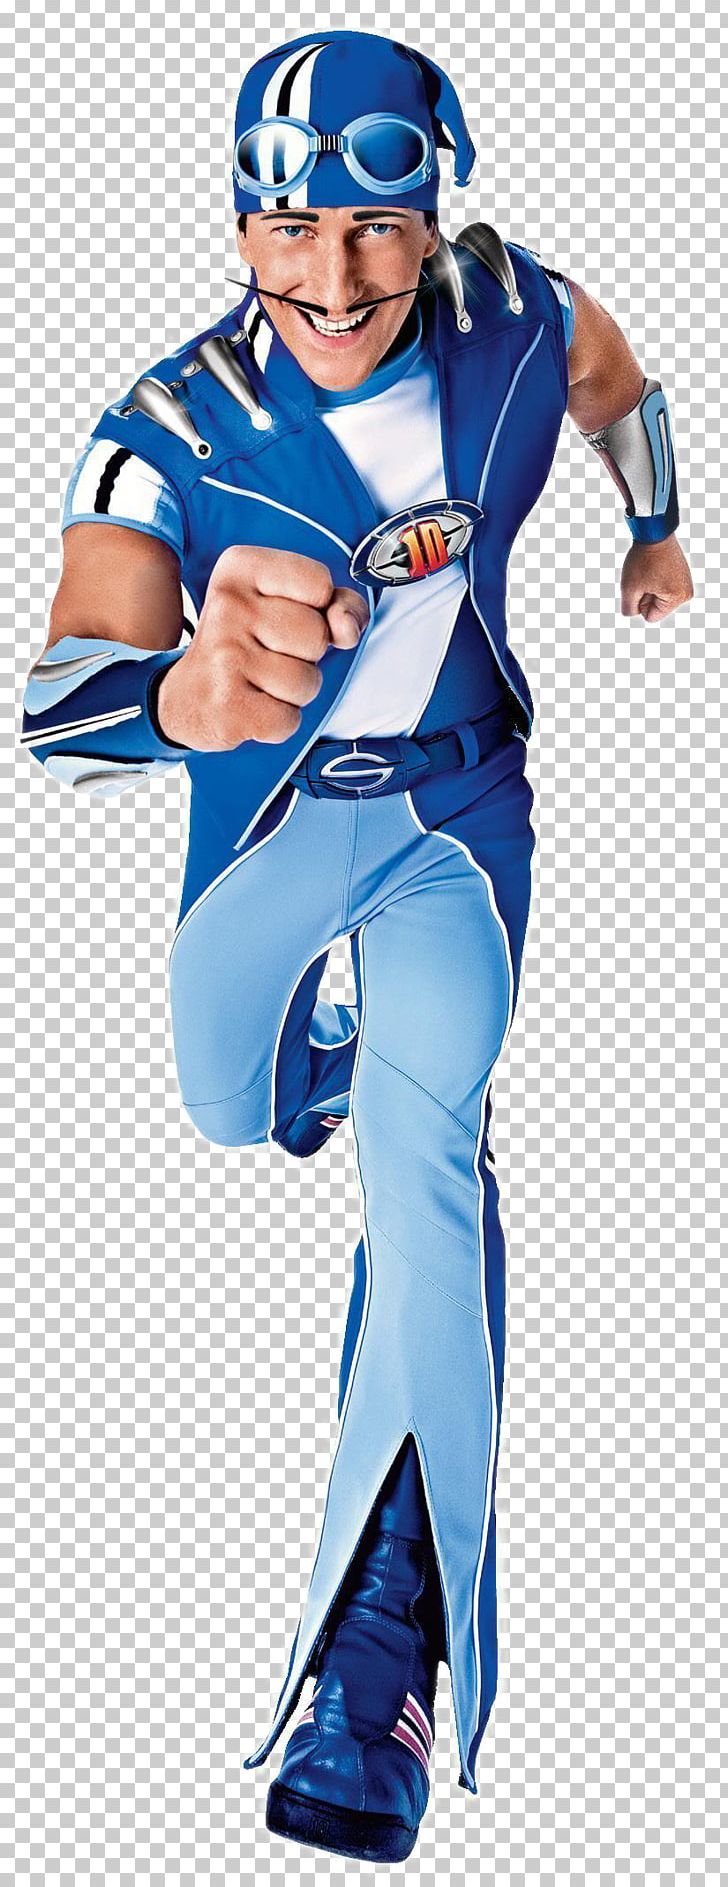 Sportacus LazyTown Stephanie Television Show Character PNG, Clipart, Baseball Equipment, Bicycle Clothing, Blue, Child, Dora The Explorer Free PNG Download